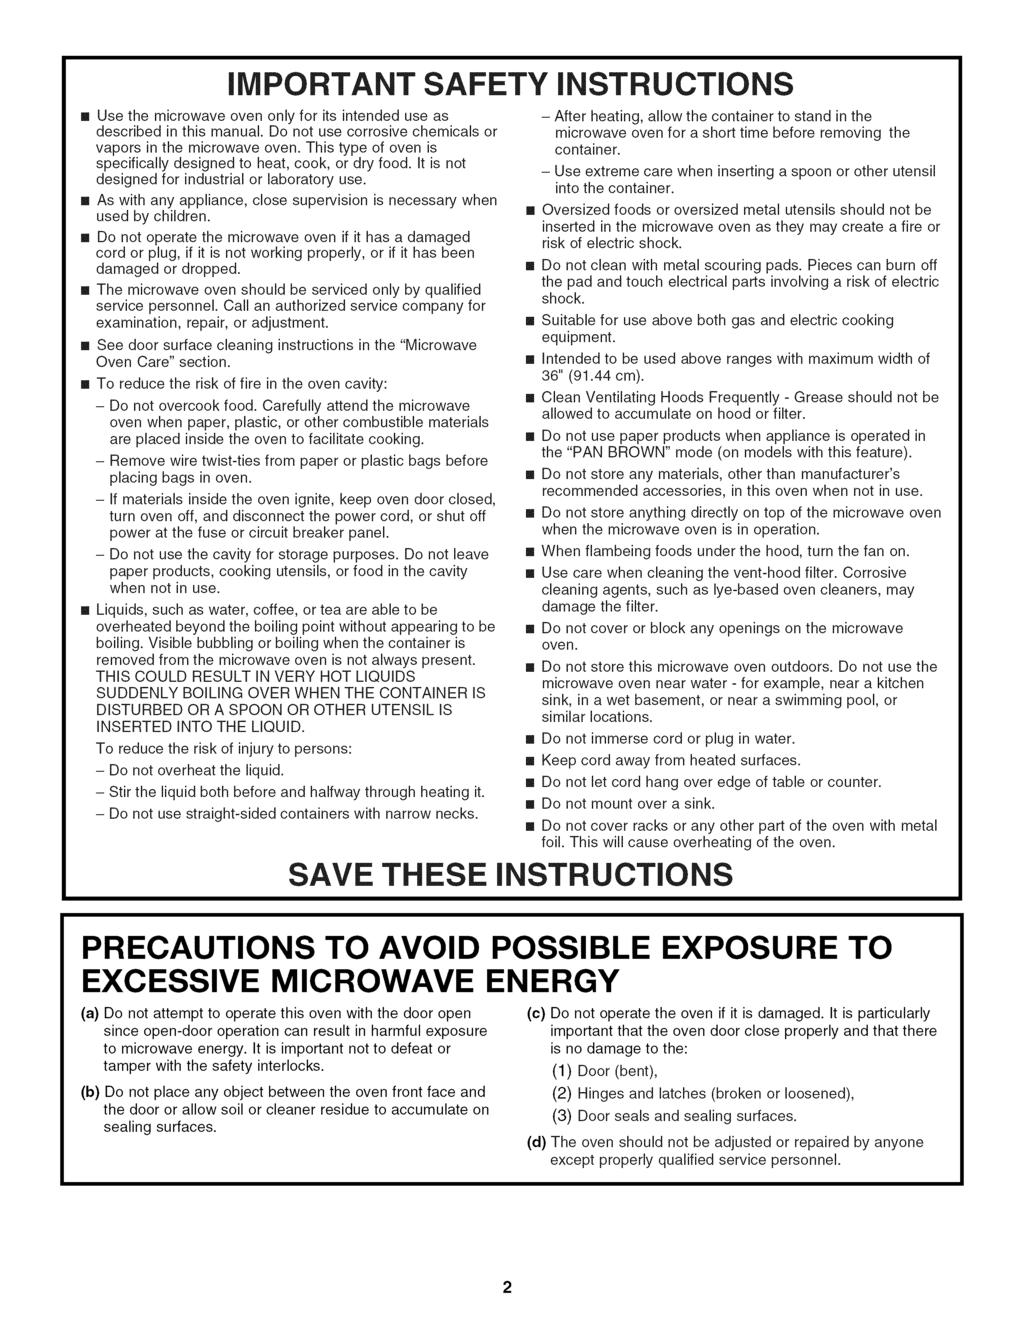 important SAFETY instructions m Use the microwave oven only for its intended use as described in this manual. Do not use corrosive chemicals or vapors in the microwave oven.